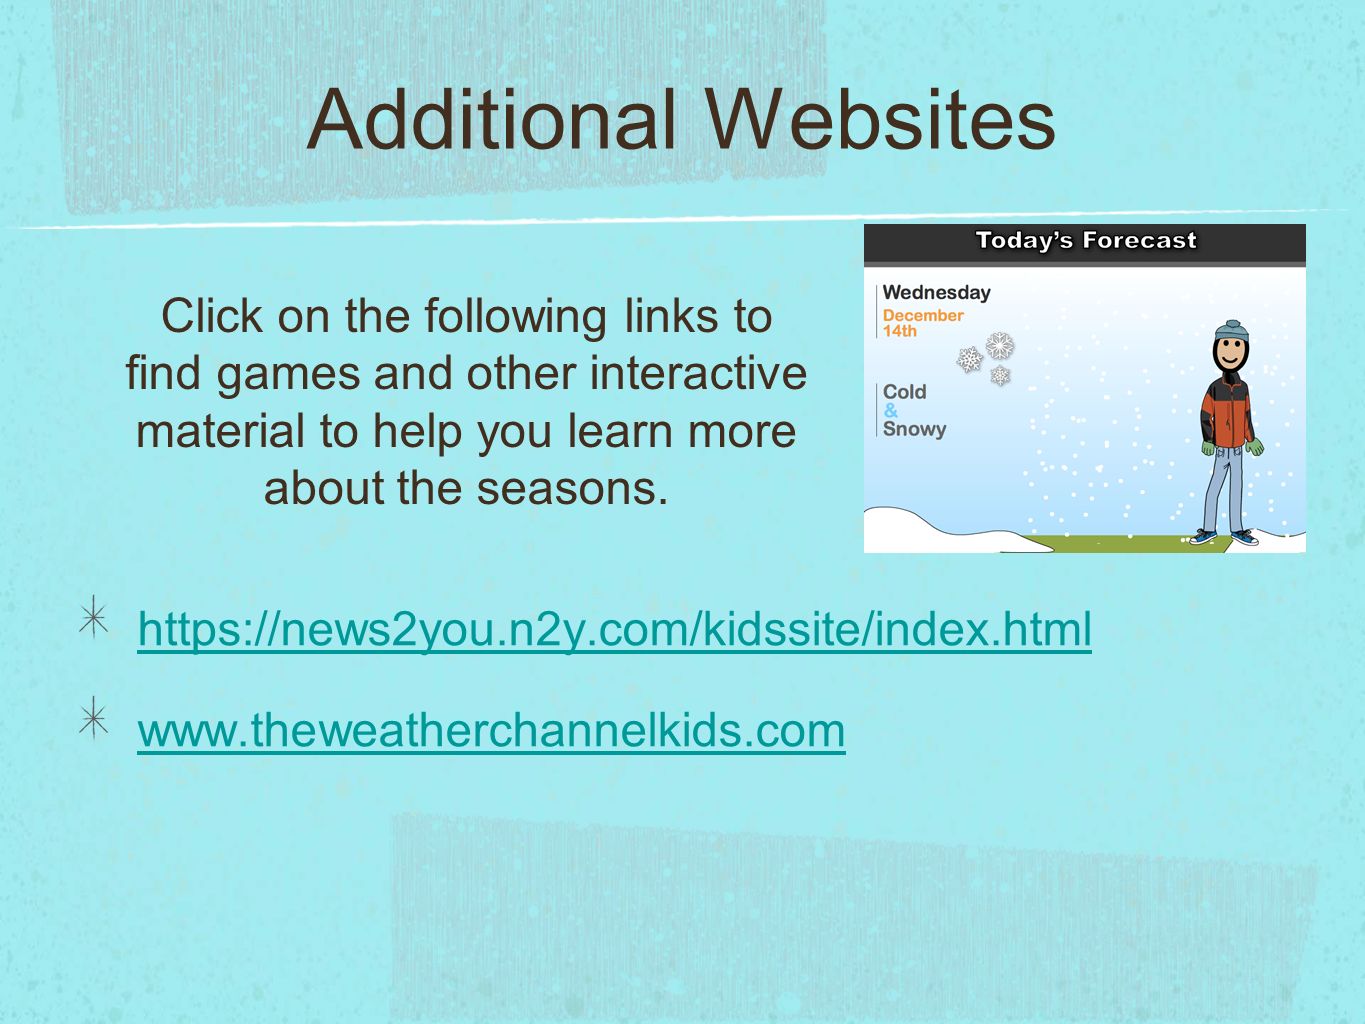 Additional Websites     Click on the following links to find games and other interactive material to help you learn more about the seasons.